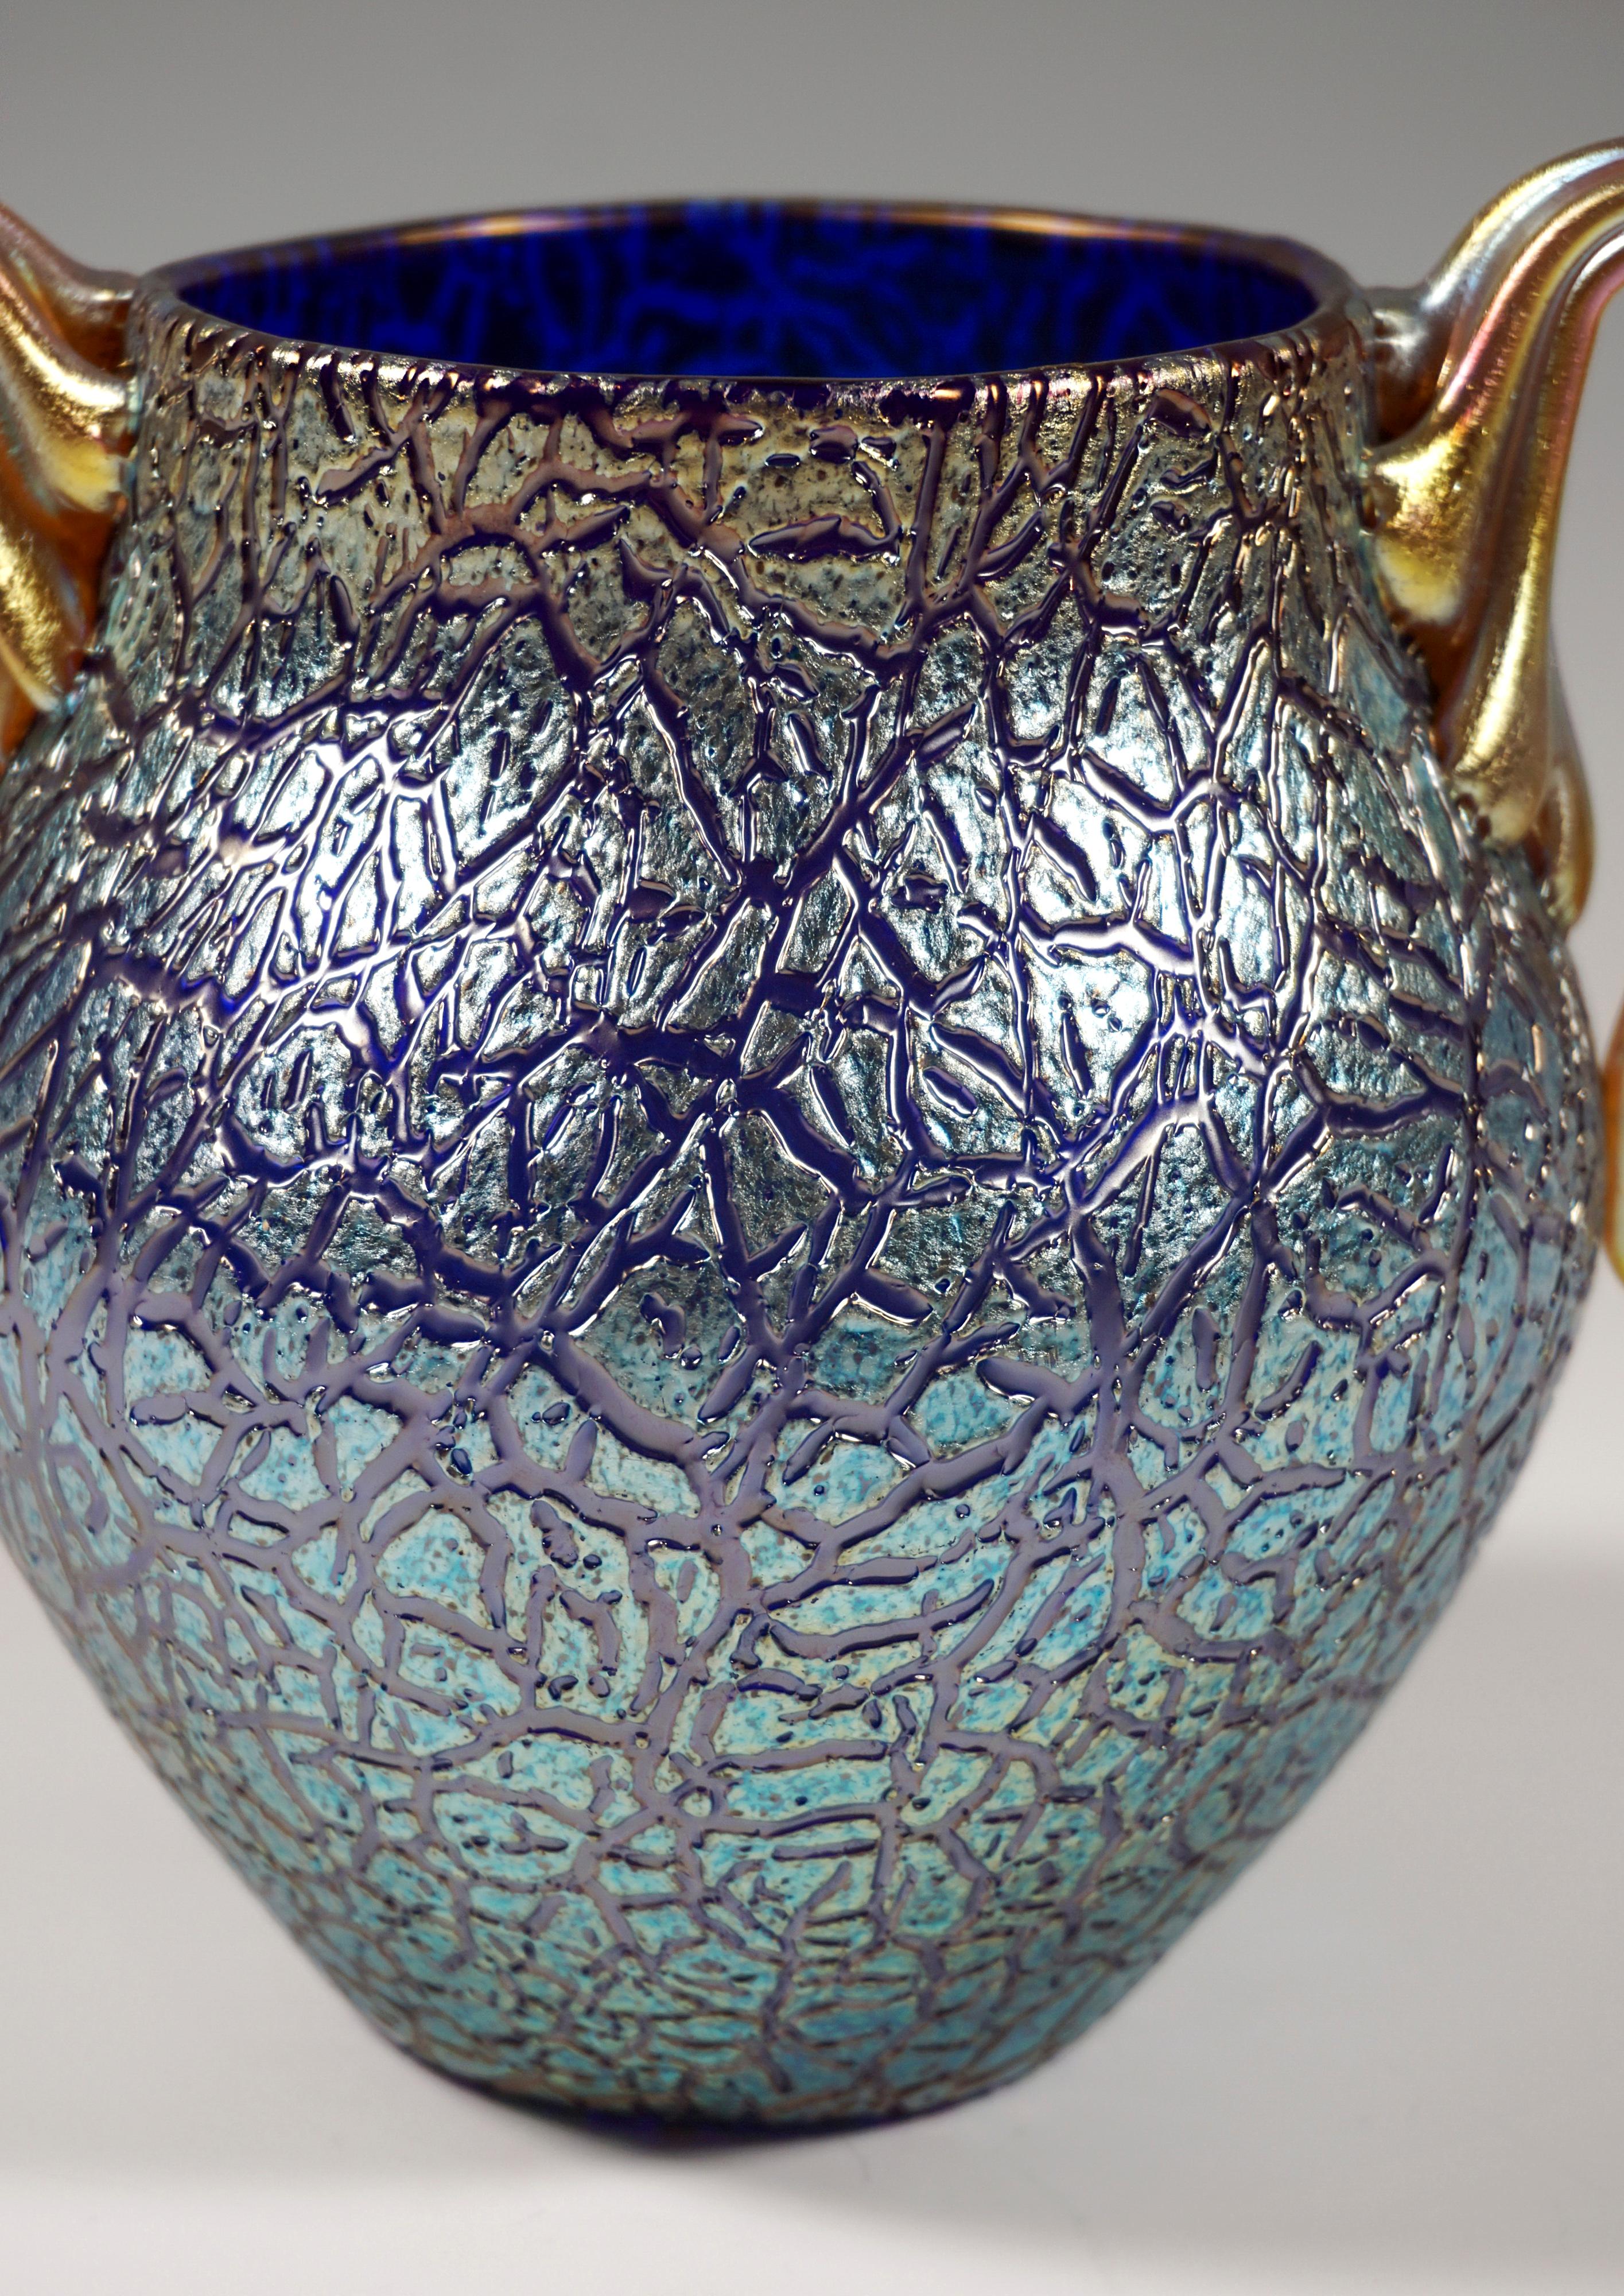 Hand-Crafted Loetz Art Nouveau Vase Cobalt Mimosa with 2 Handles, Austria-Hungary, circa 1909 For Sale